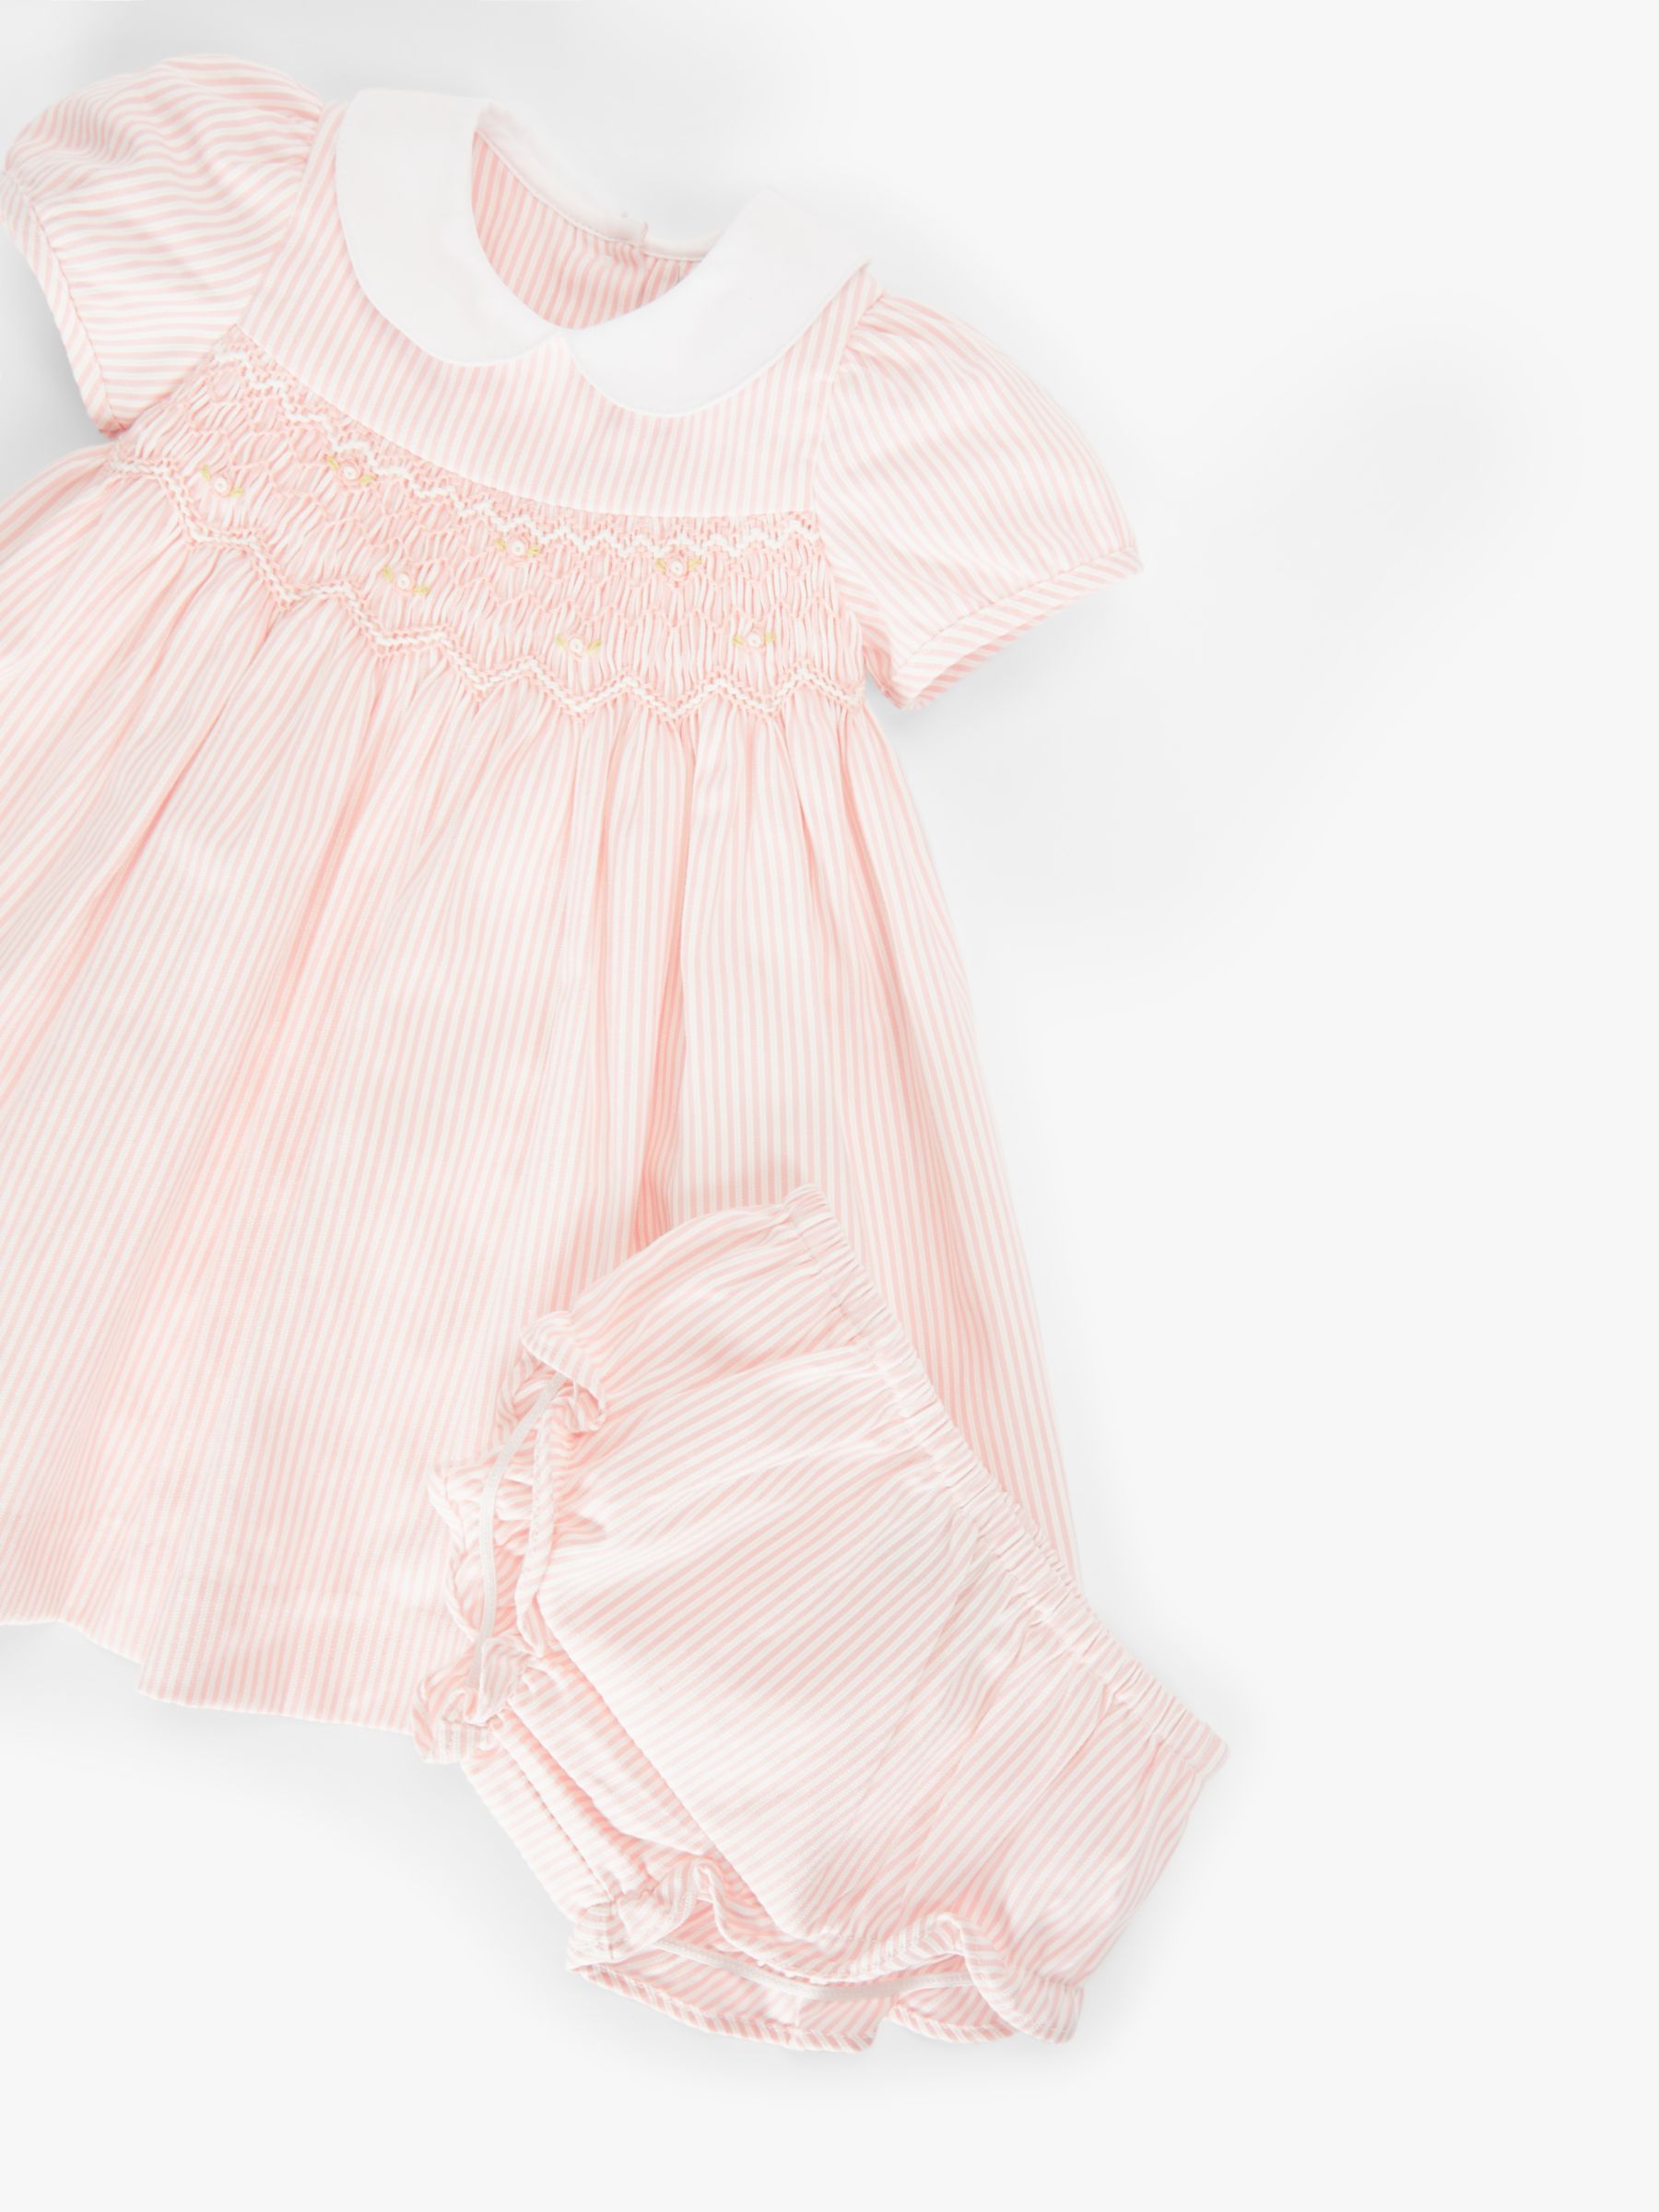 John Lewis Heirloom Collection Baby Stripe Dress and Knicker Set, Pink, 0-3 months